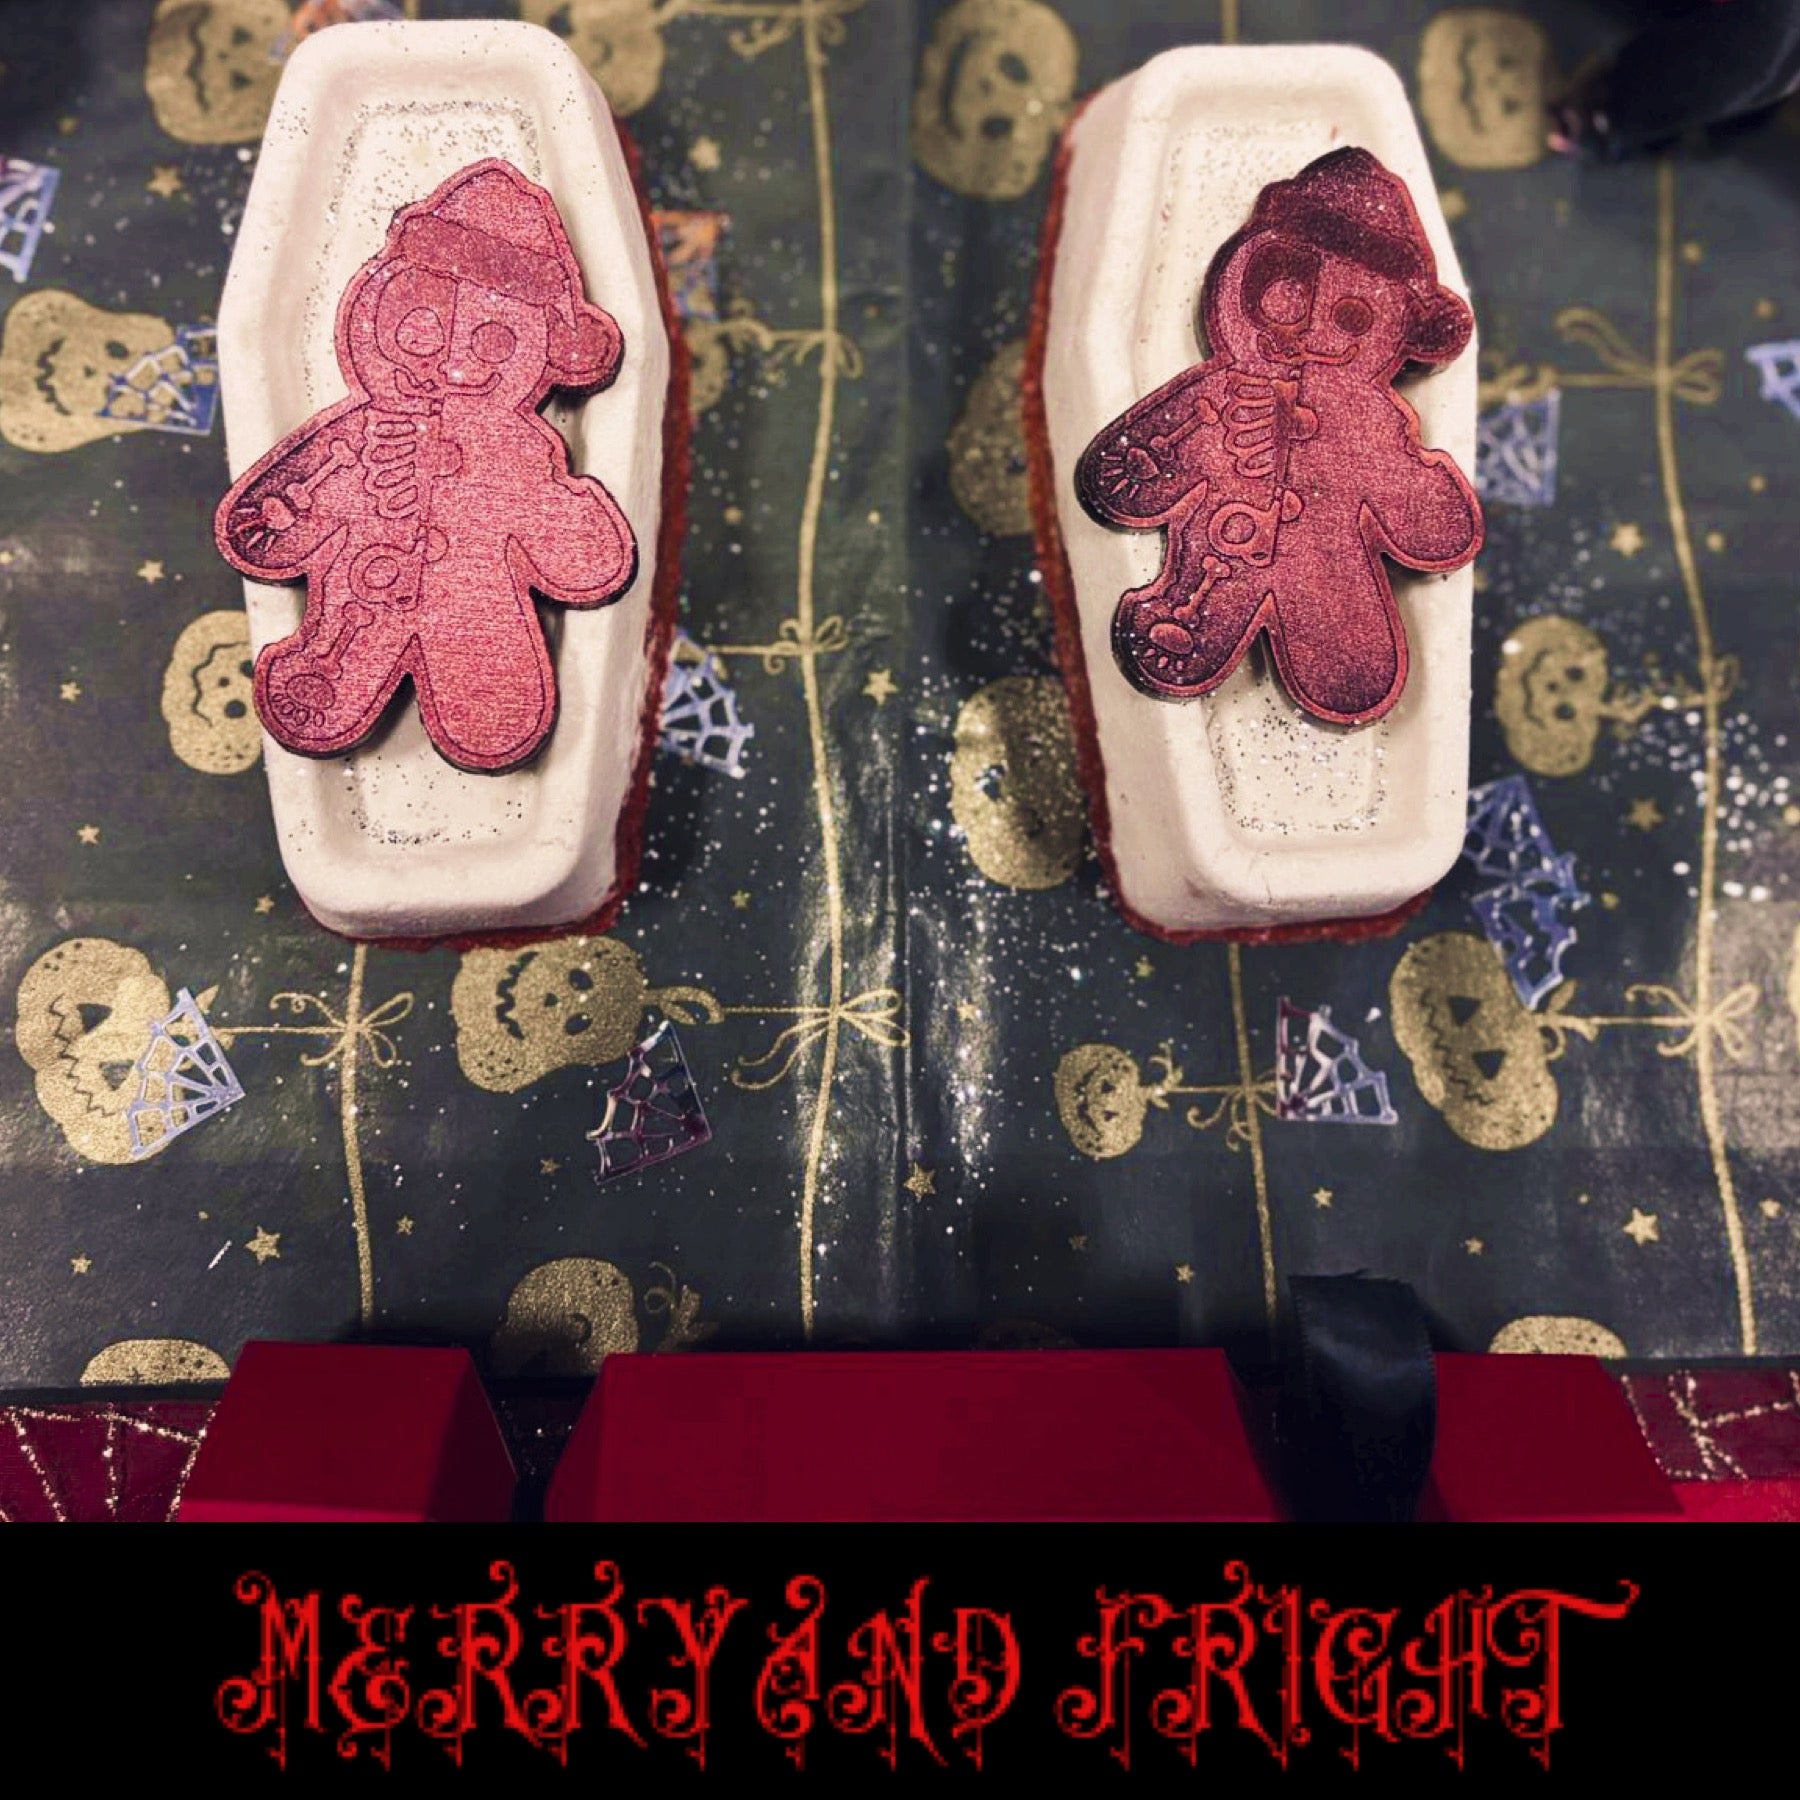 Merry and fright coffin Hexbomb